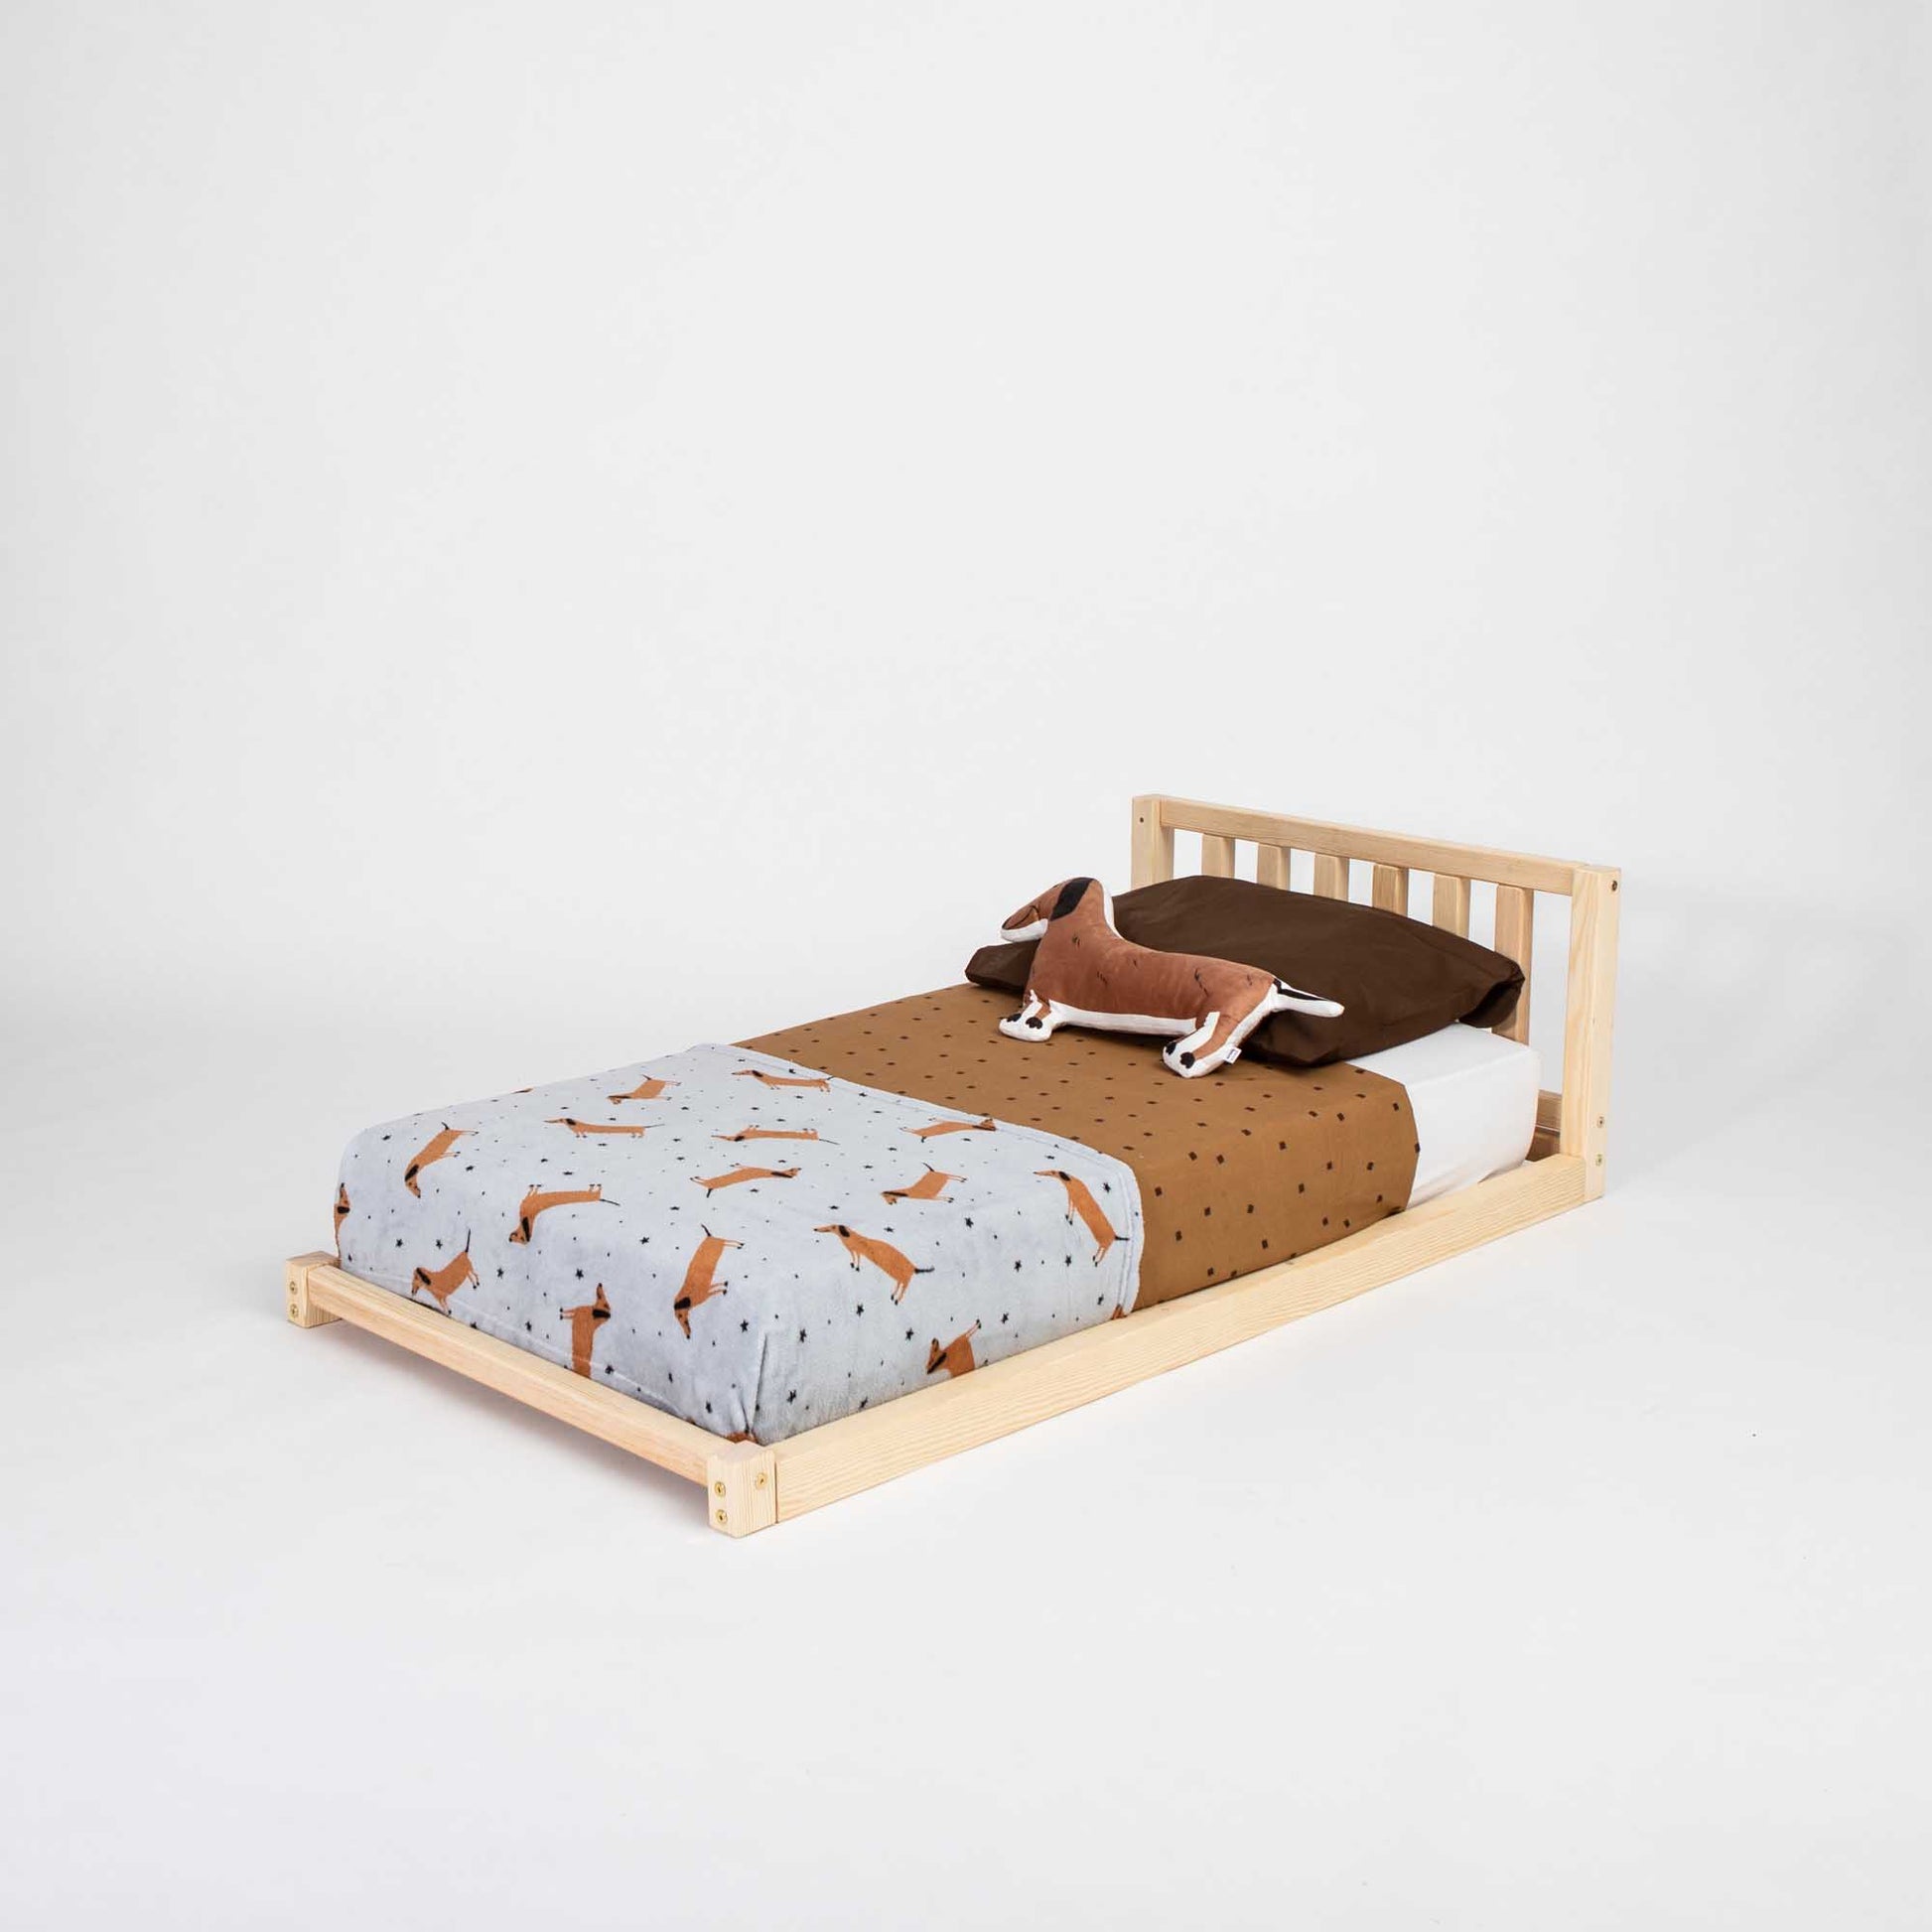 A Sweet Home From Wood toddler bed with a headboard.